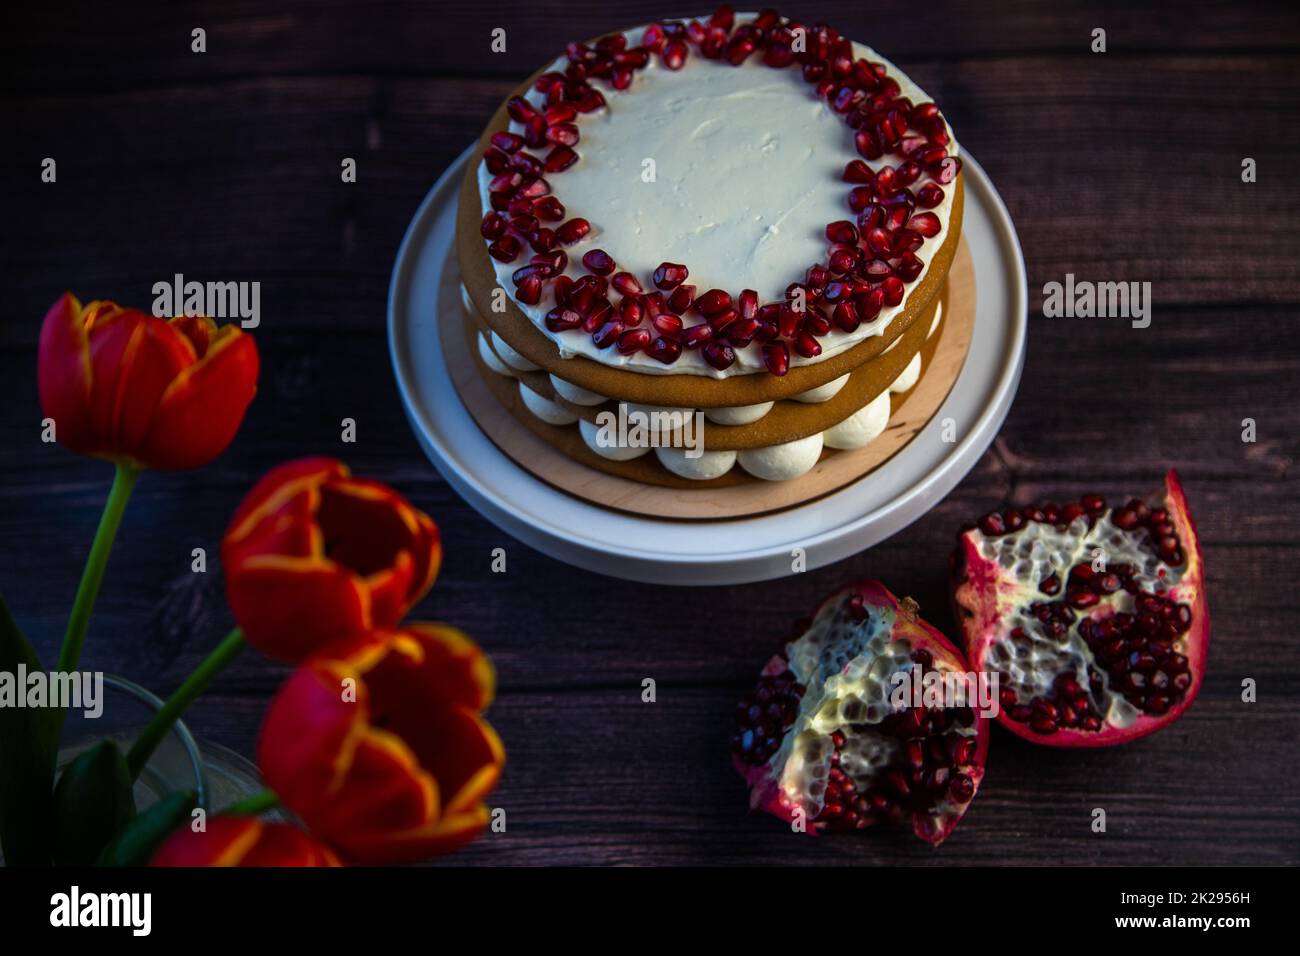 A cake of three layers consisting of cakes and white cream, decorated with pomegranate on top in a circle, stands on a dark background, next to tulips and pomegranates. Stock Photo